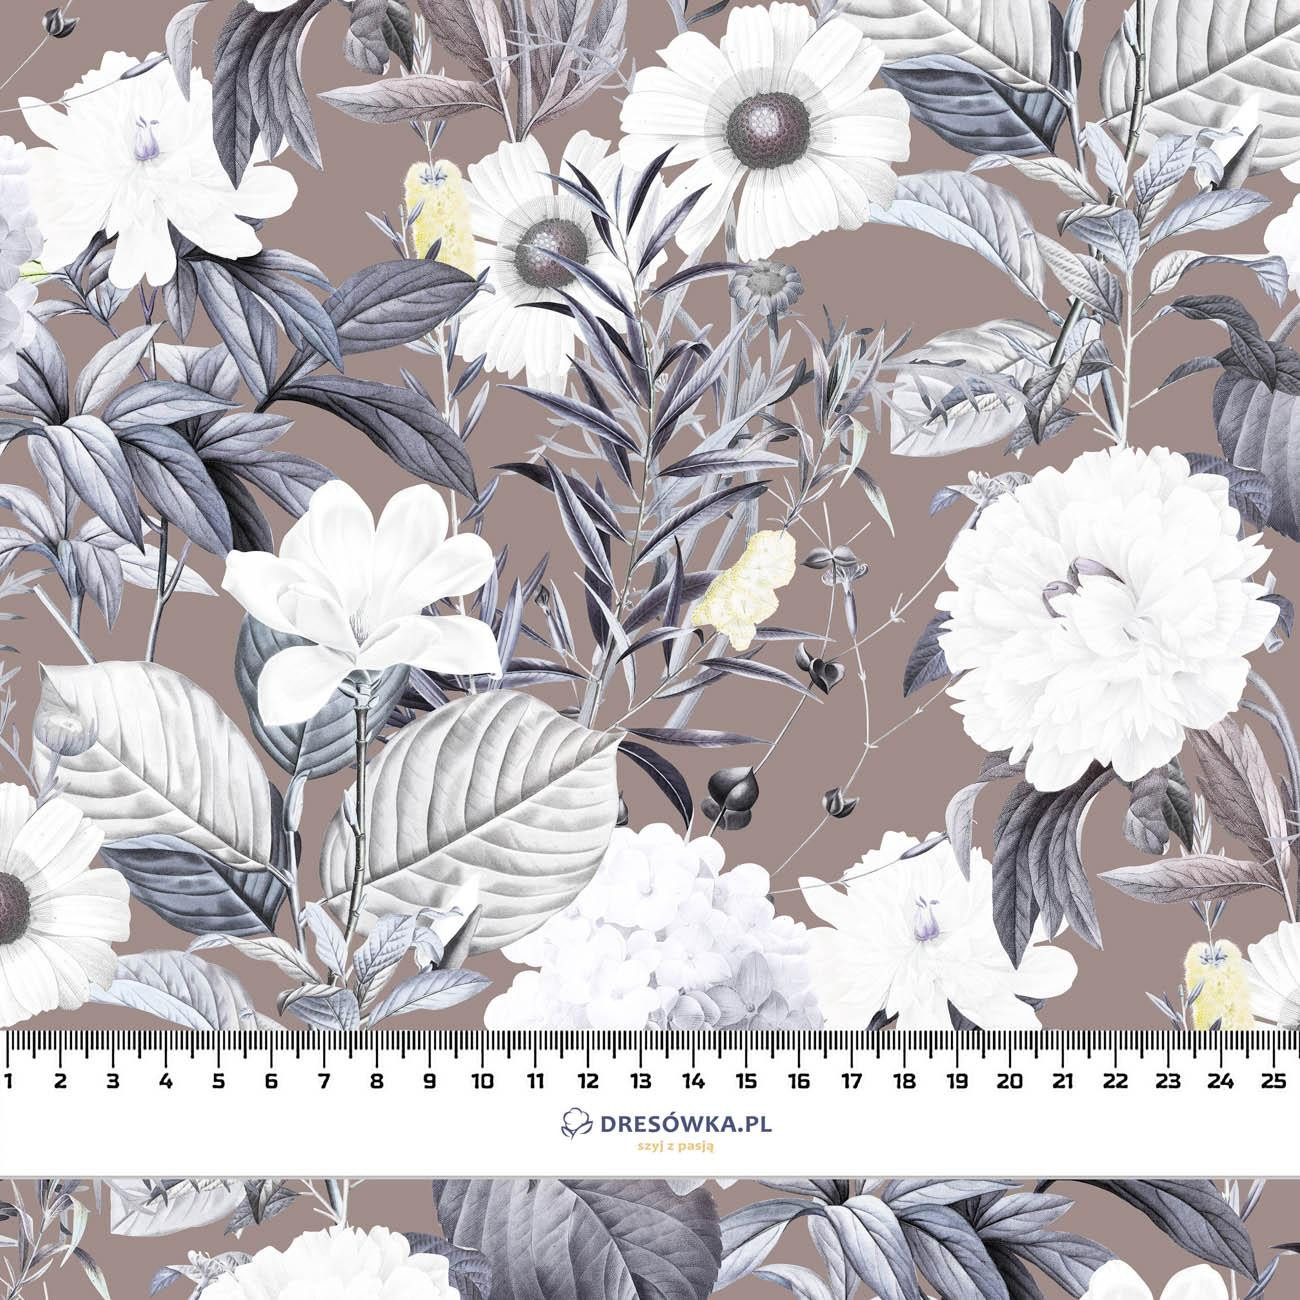 LUXE BLOSSOM pat. 2 - Cotton woven fabric